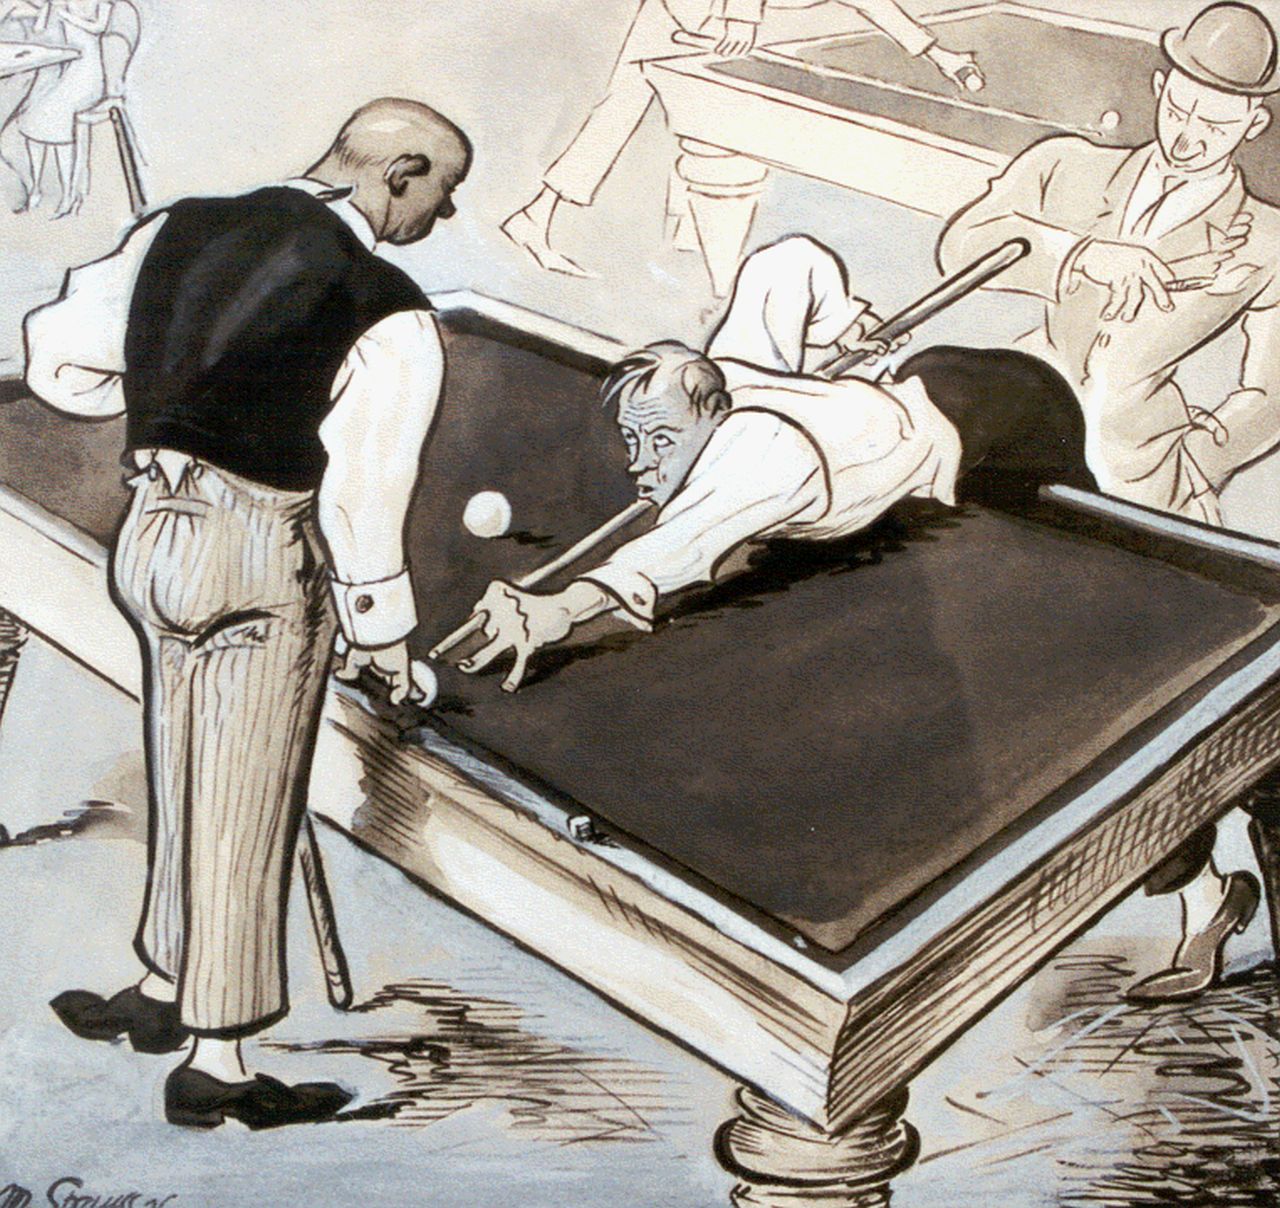 M. Strauss | Billiards, gouache on paper, 25.7 x 27.7 cm, signed l.l. and dated '26 on the reverse